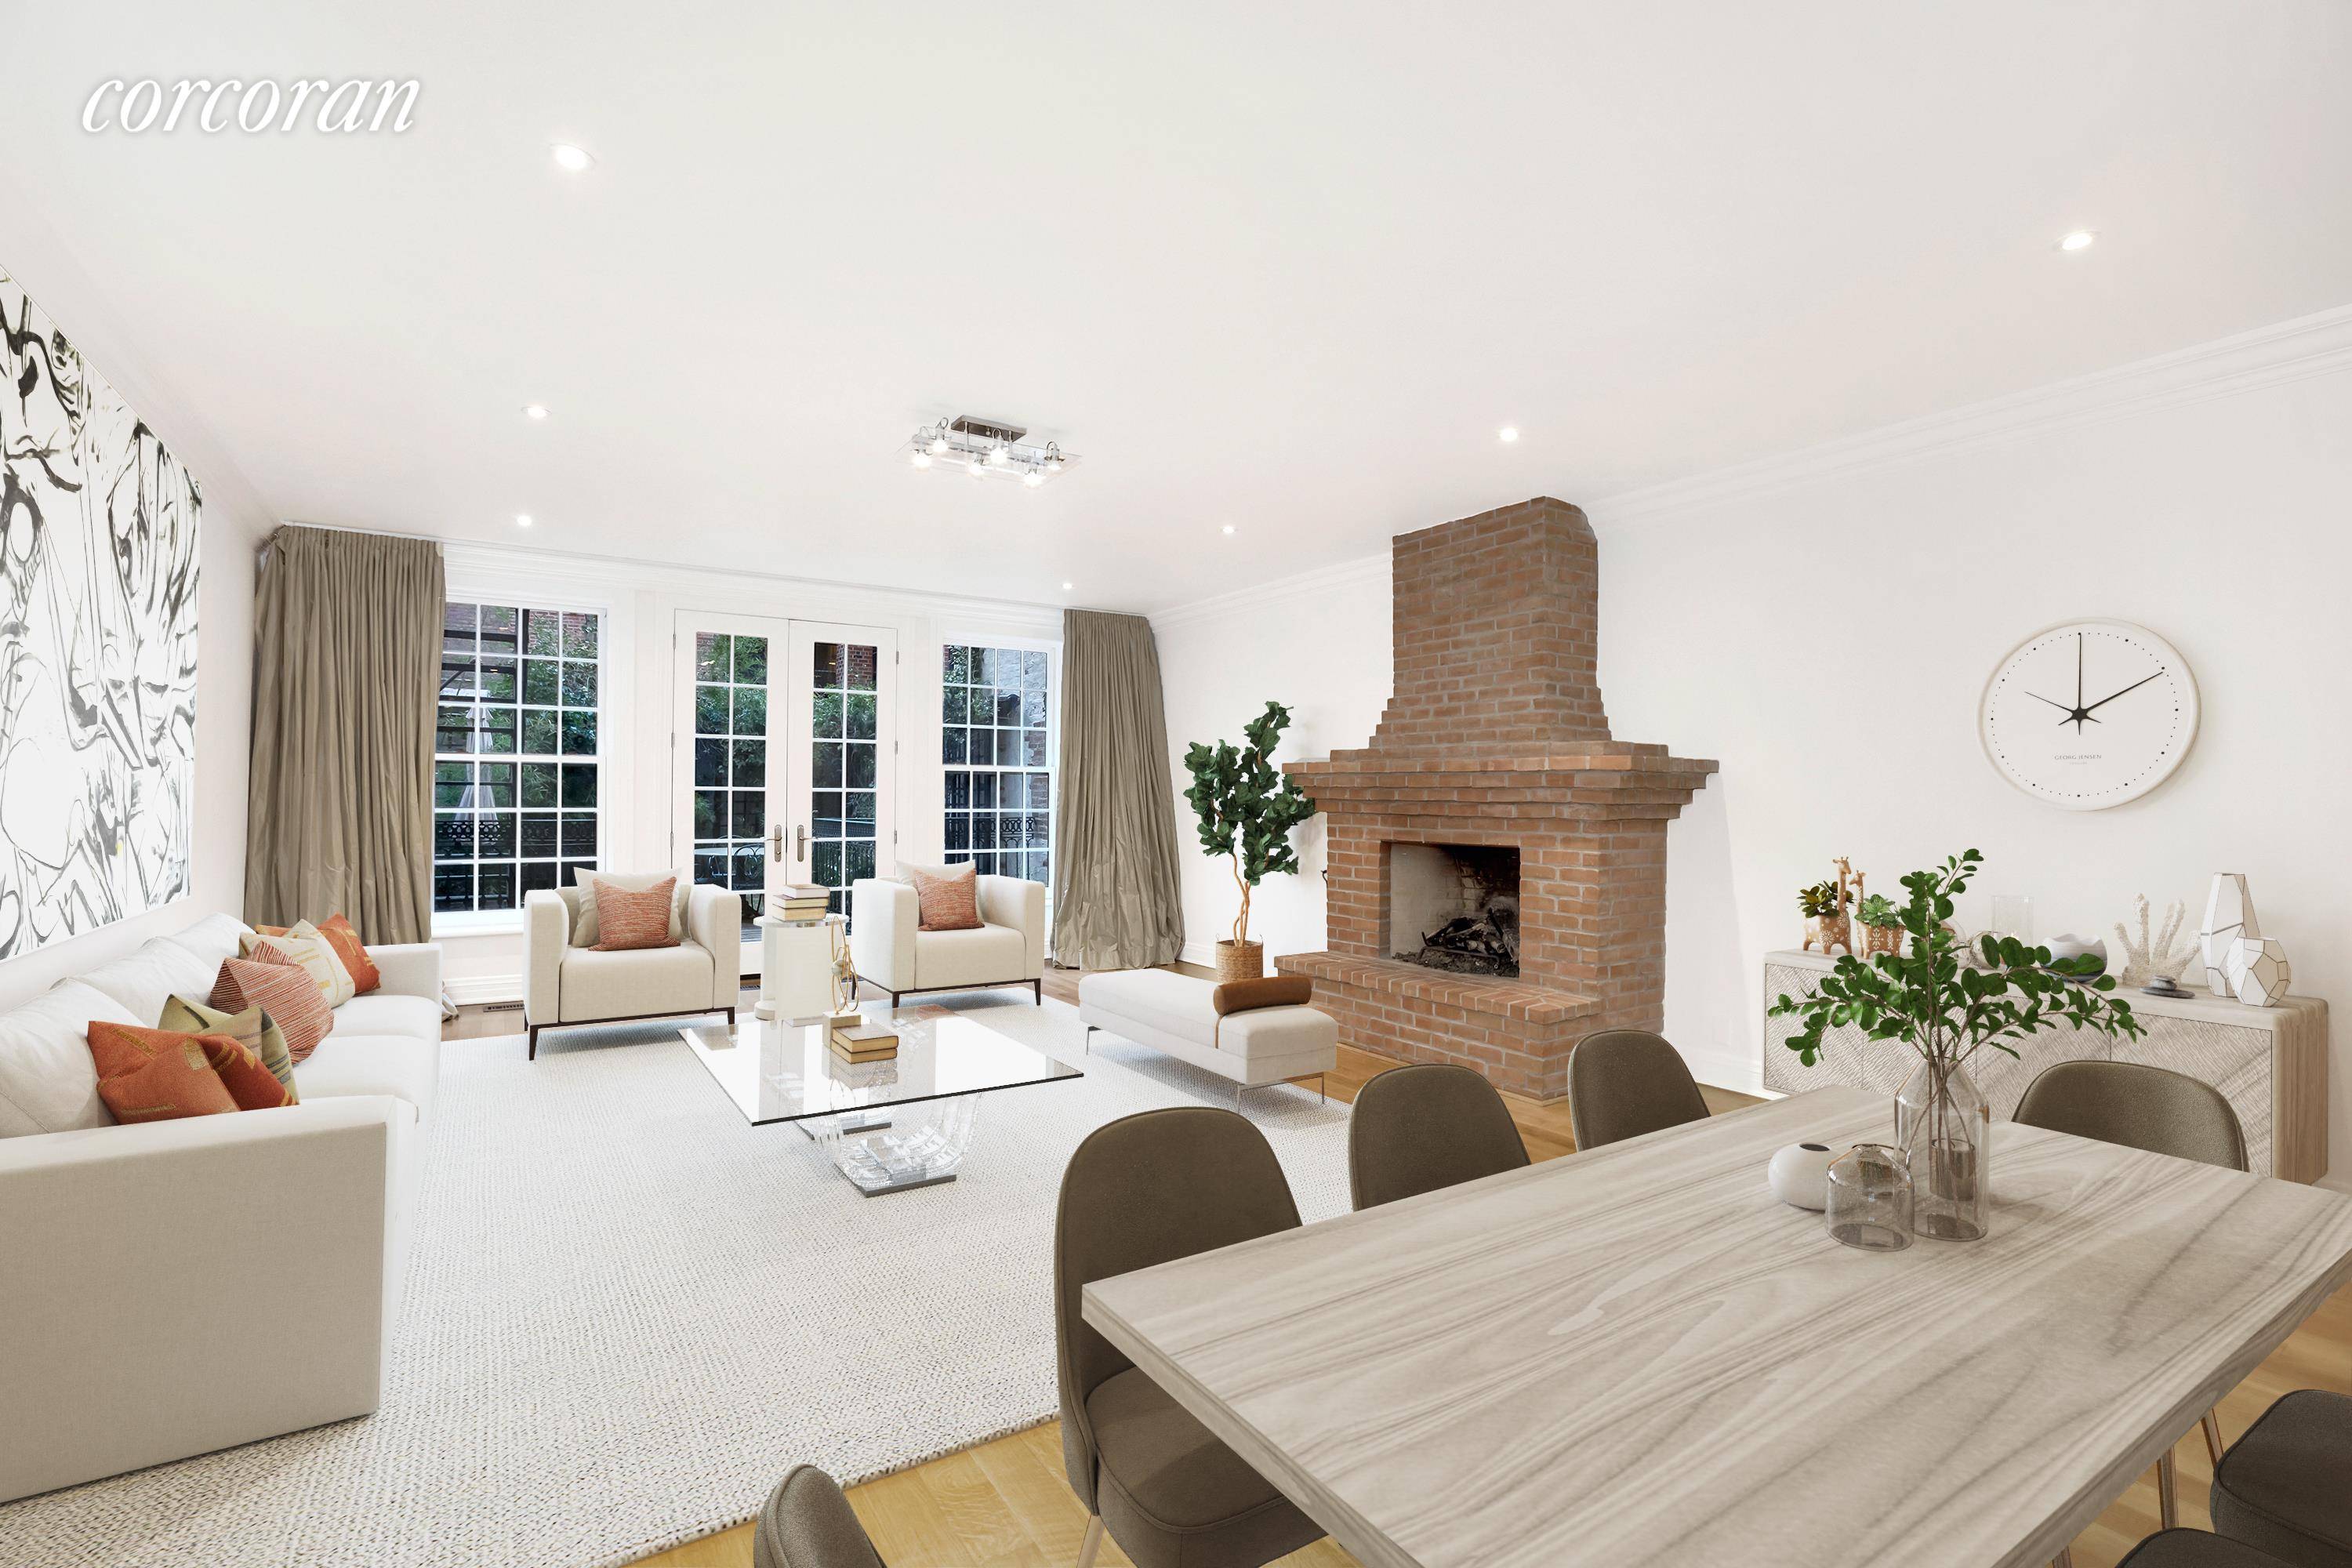 Ideally located on W71st just half a block from Central Park, this duplex Garden apartment offers the ultimate Upper West Side retreat.